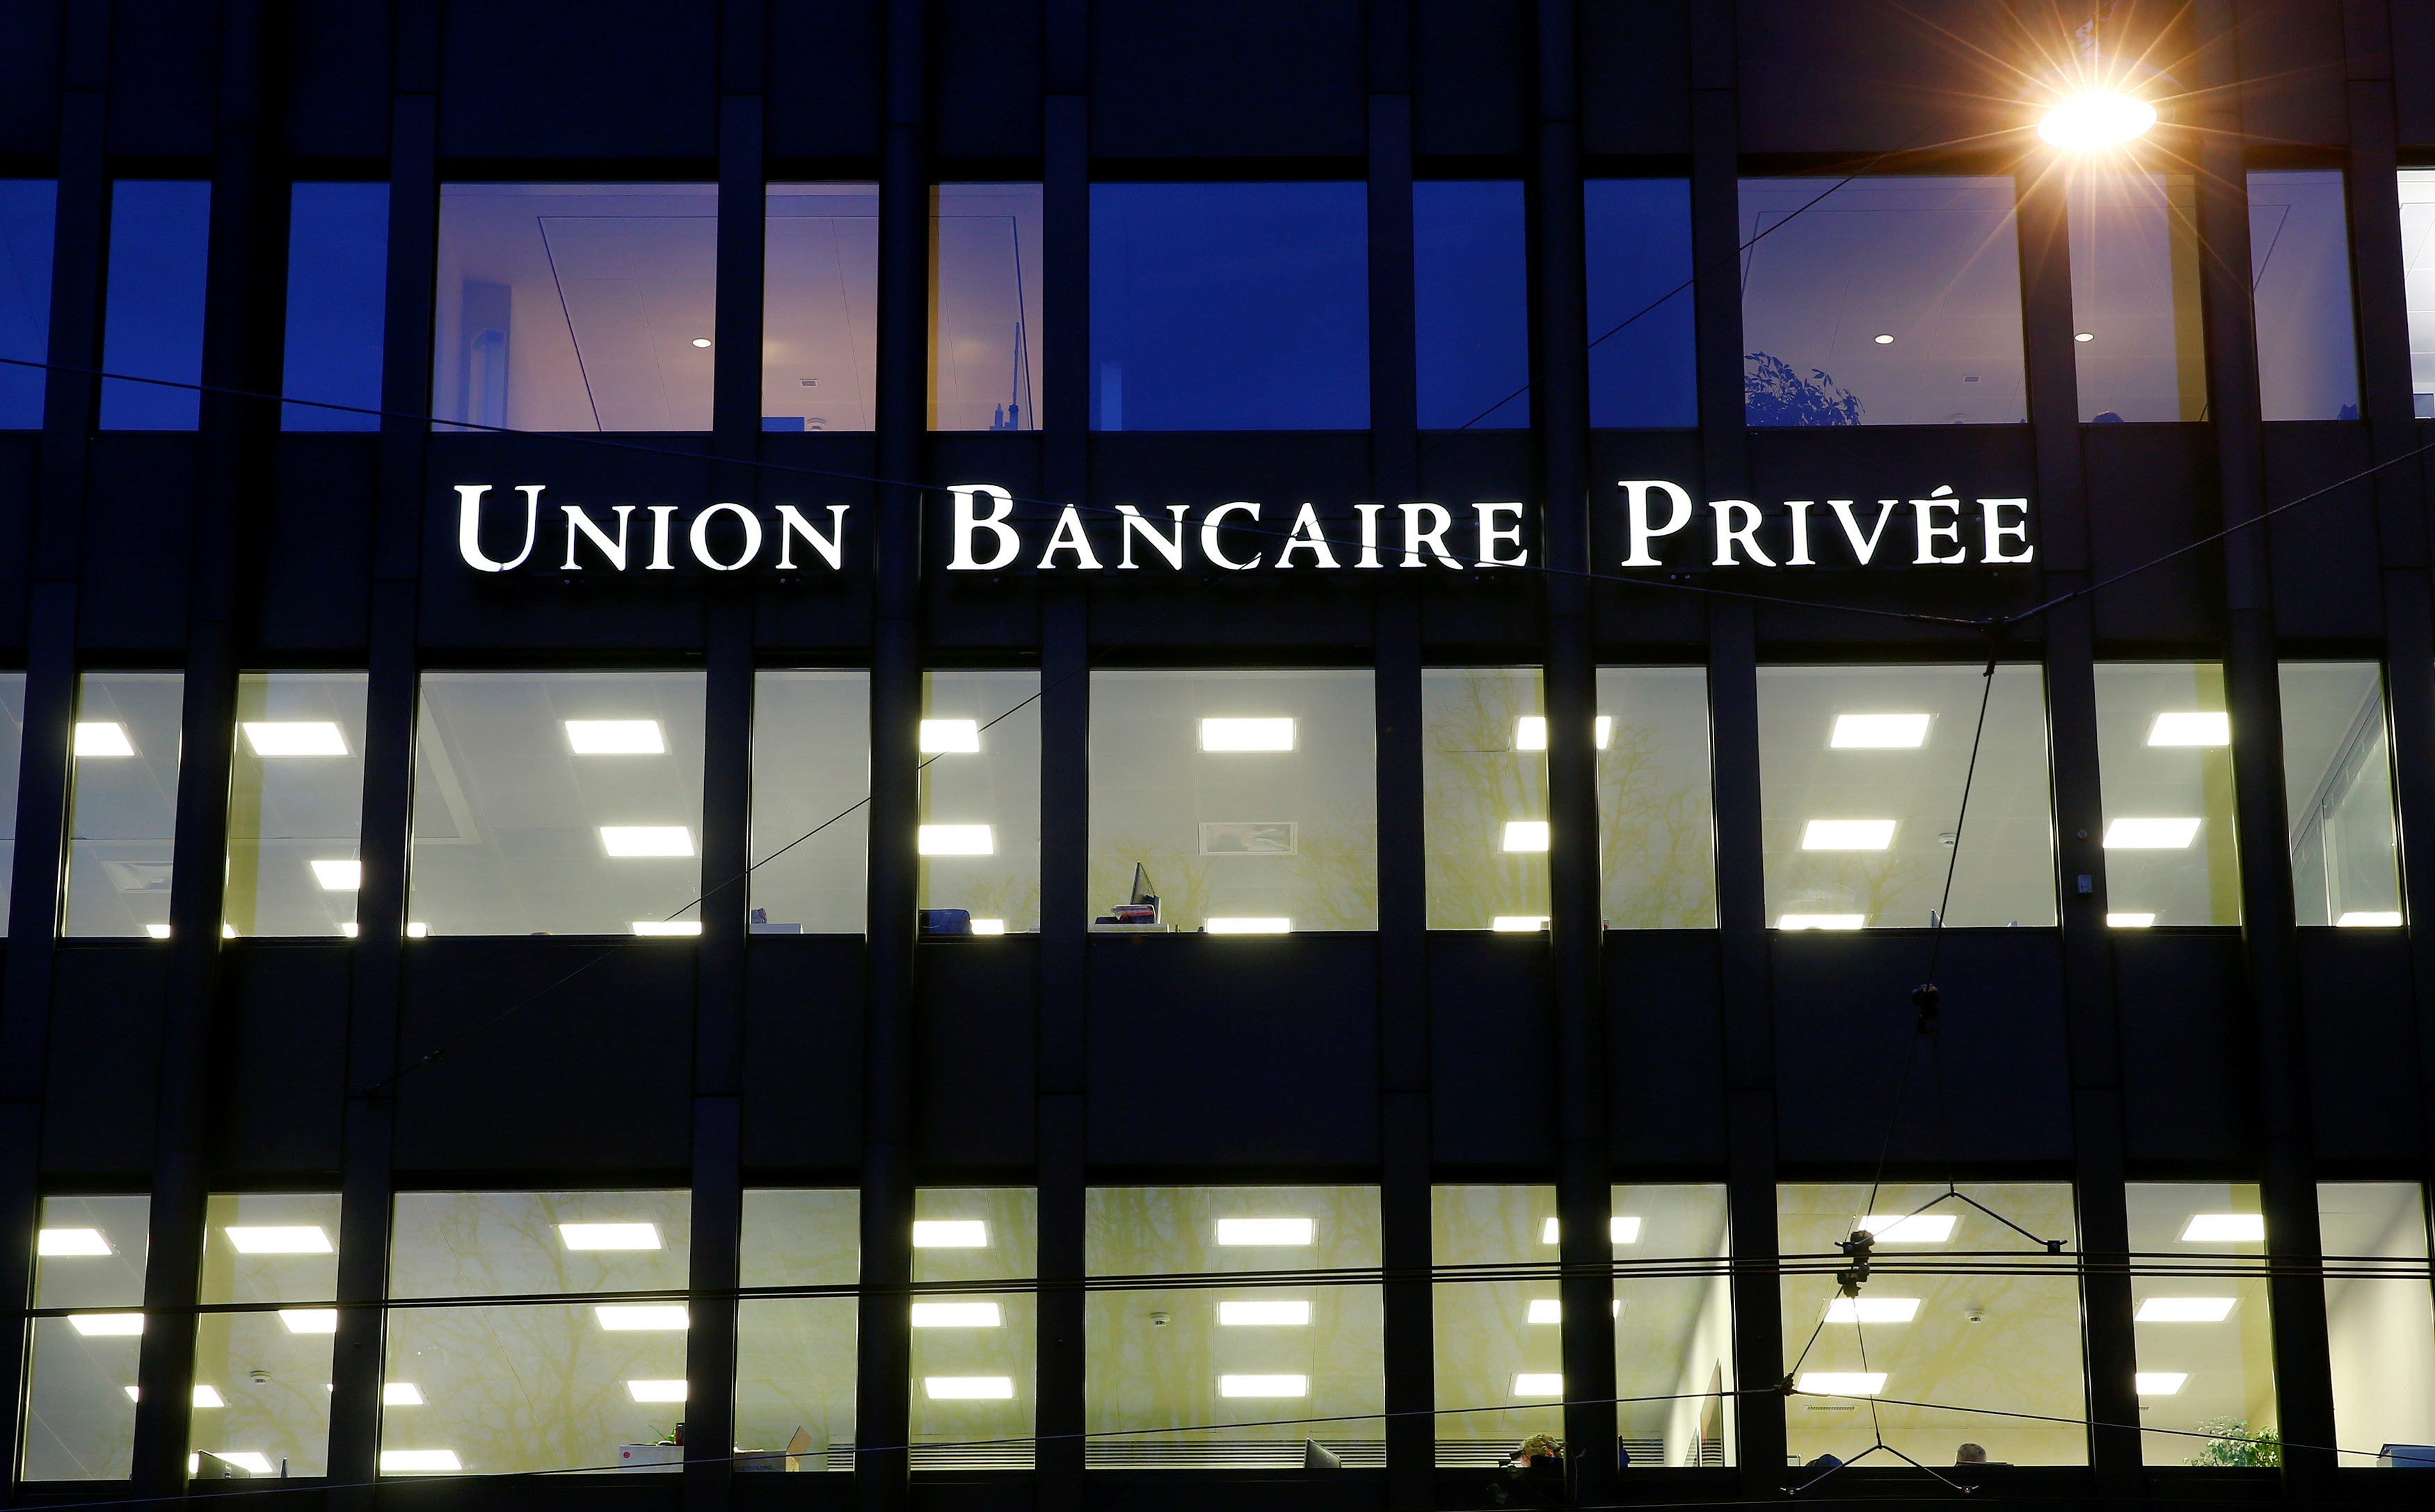 Union Bancaire Privee sign is seen in Zurich